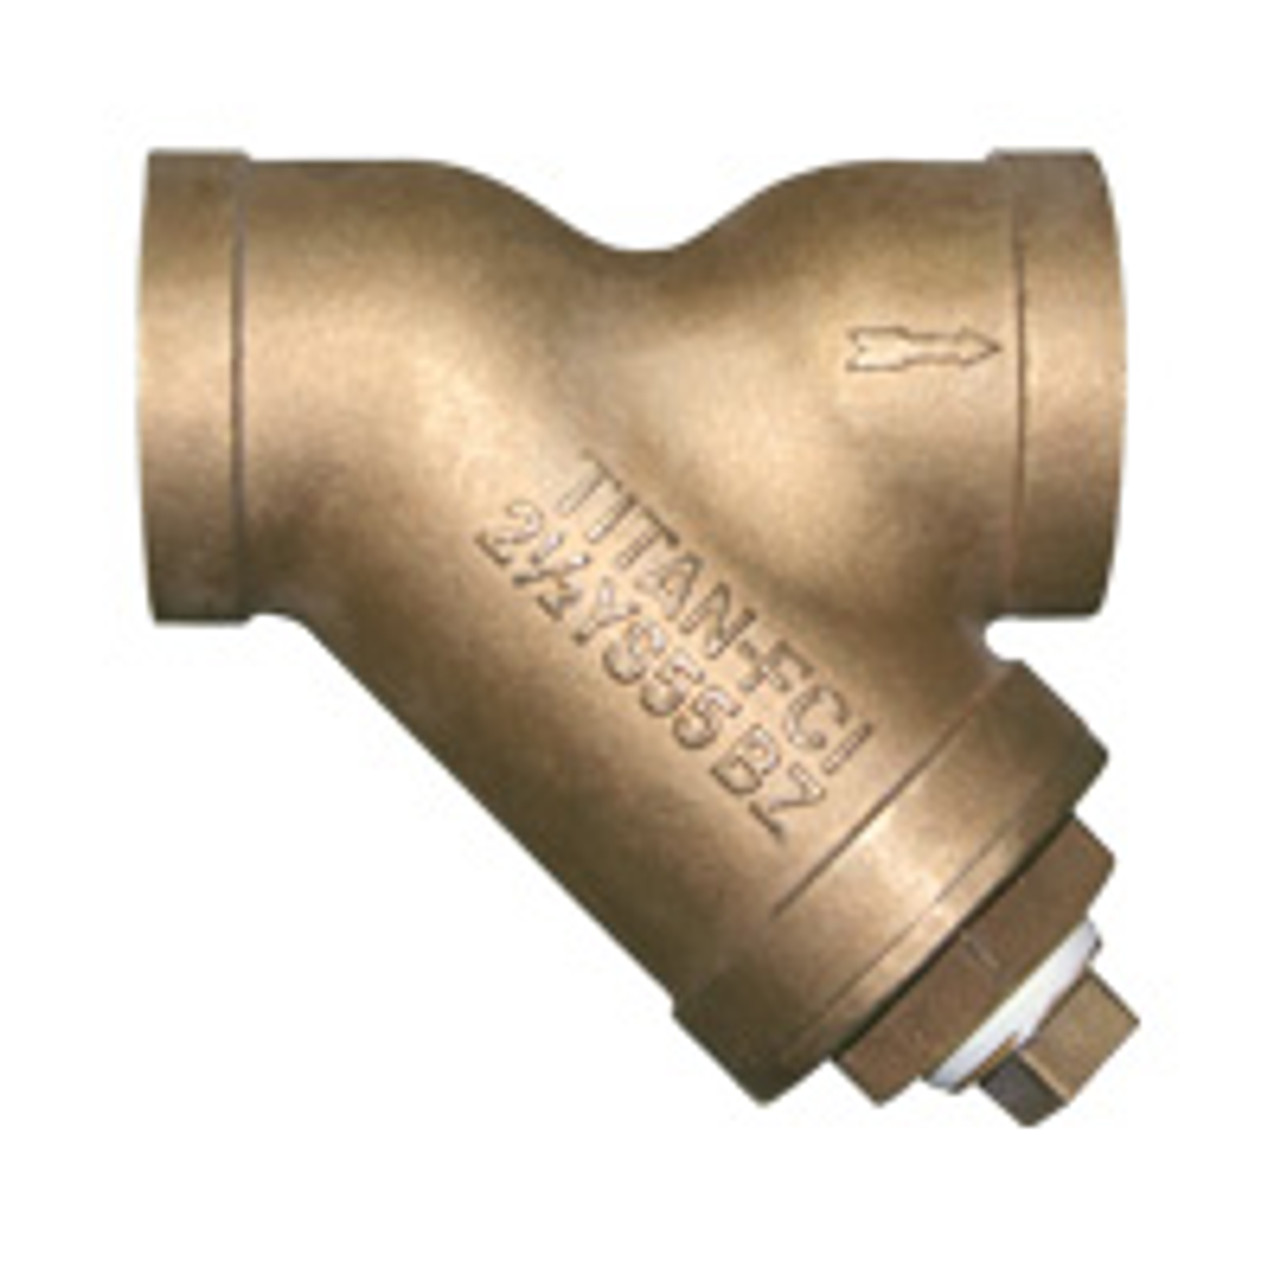 Threaded & Flanged Y-Strainers with Clean Out Plug